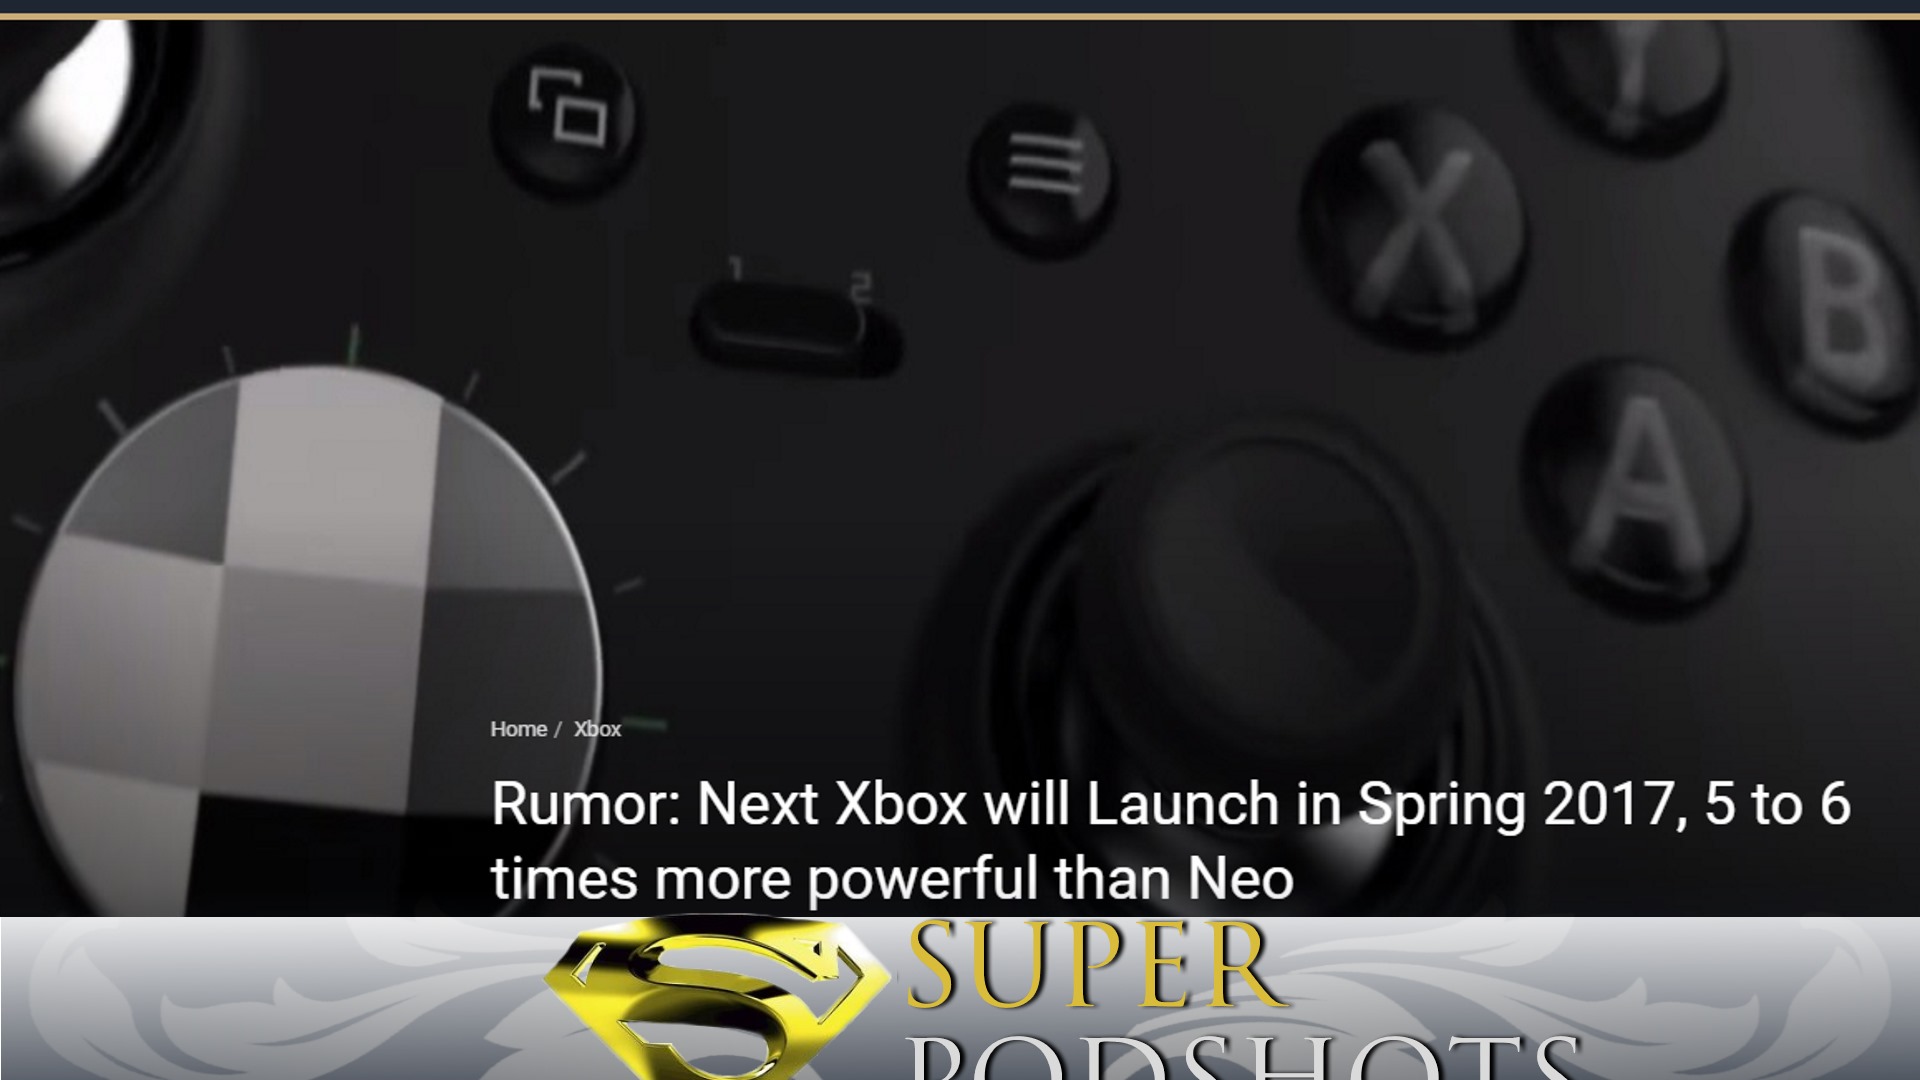 Super Podshots Ep. 46 - Rumors: Xbox 2 May Have 10 teraflops?, Are Cartriges Returning & Watch Dogs Leak 